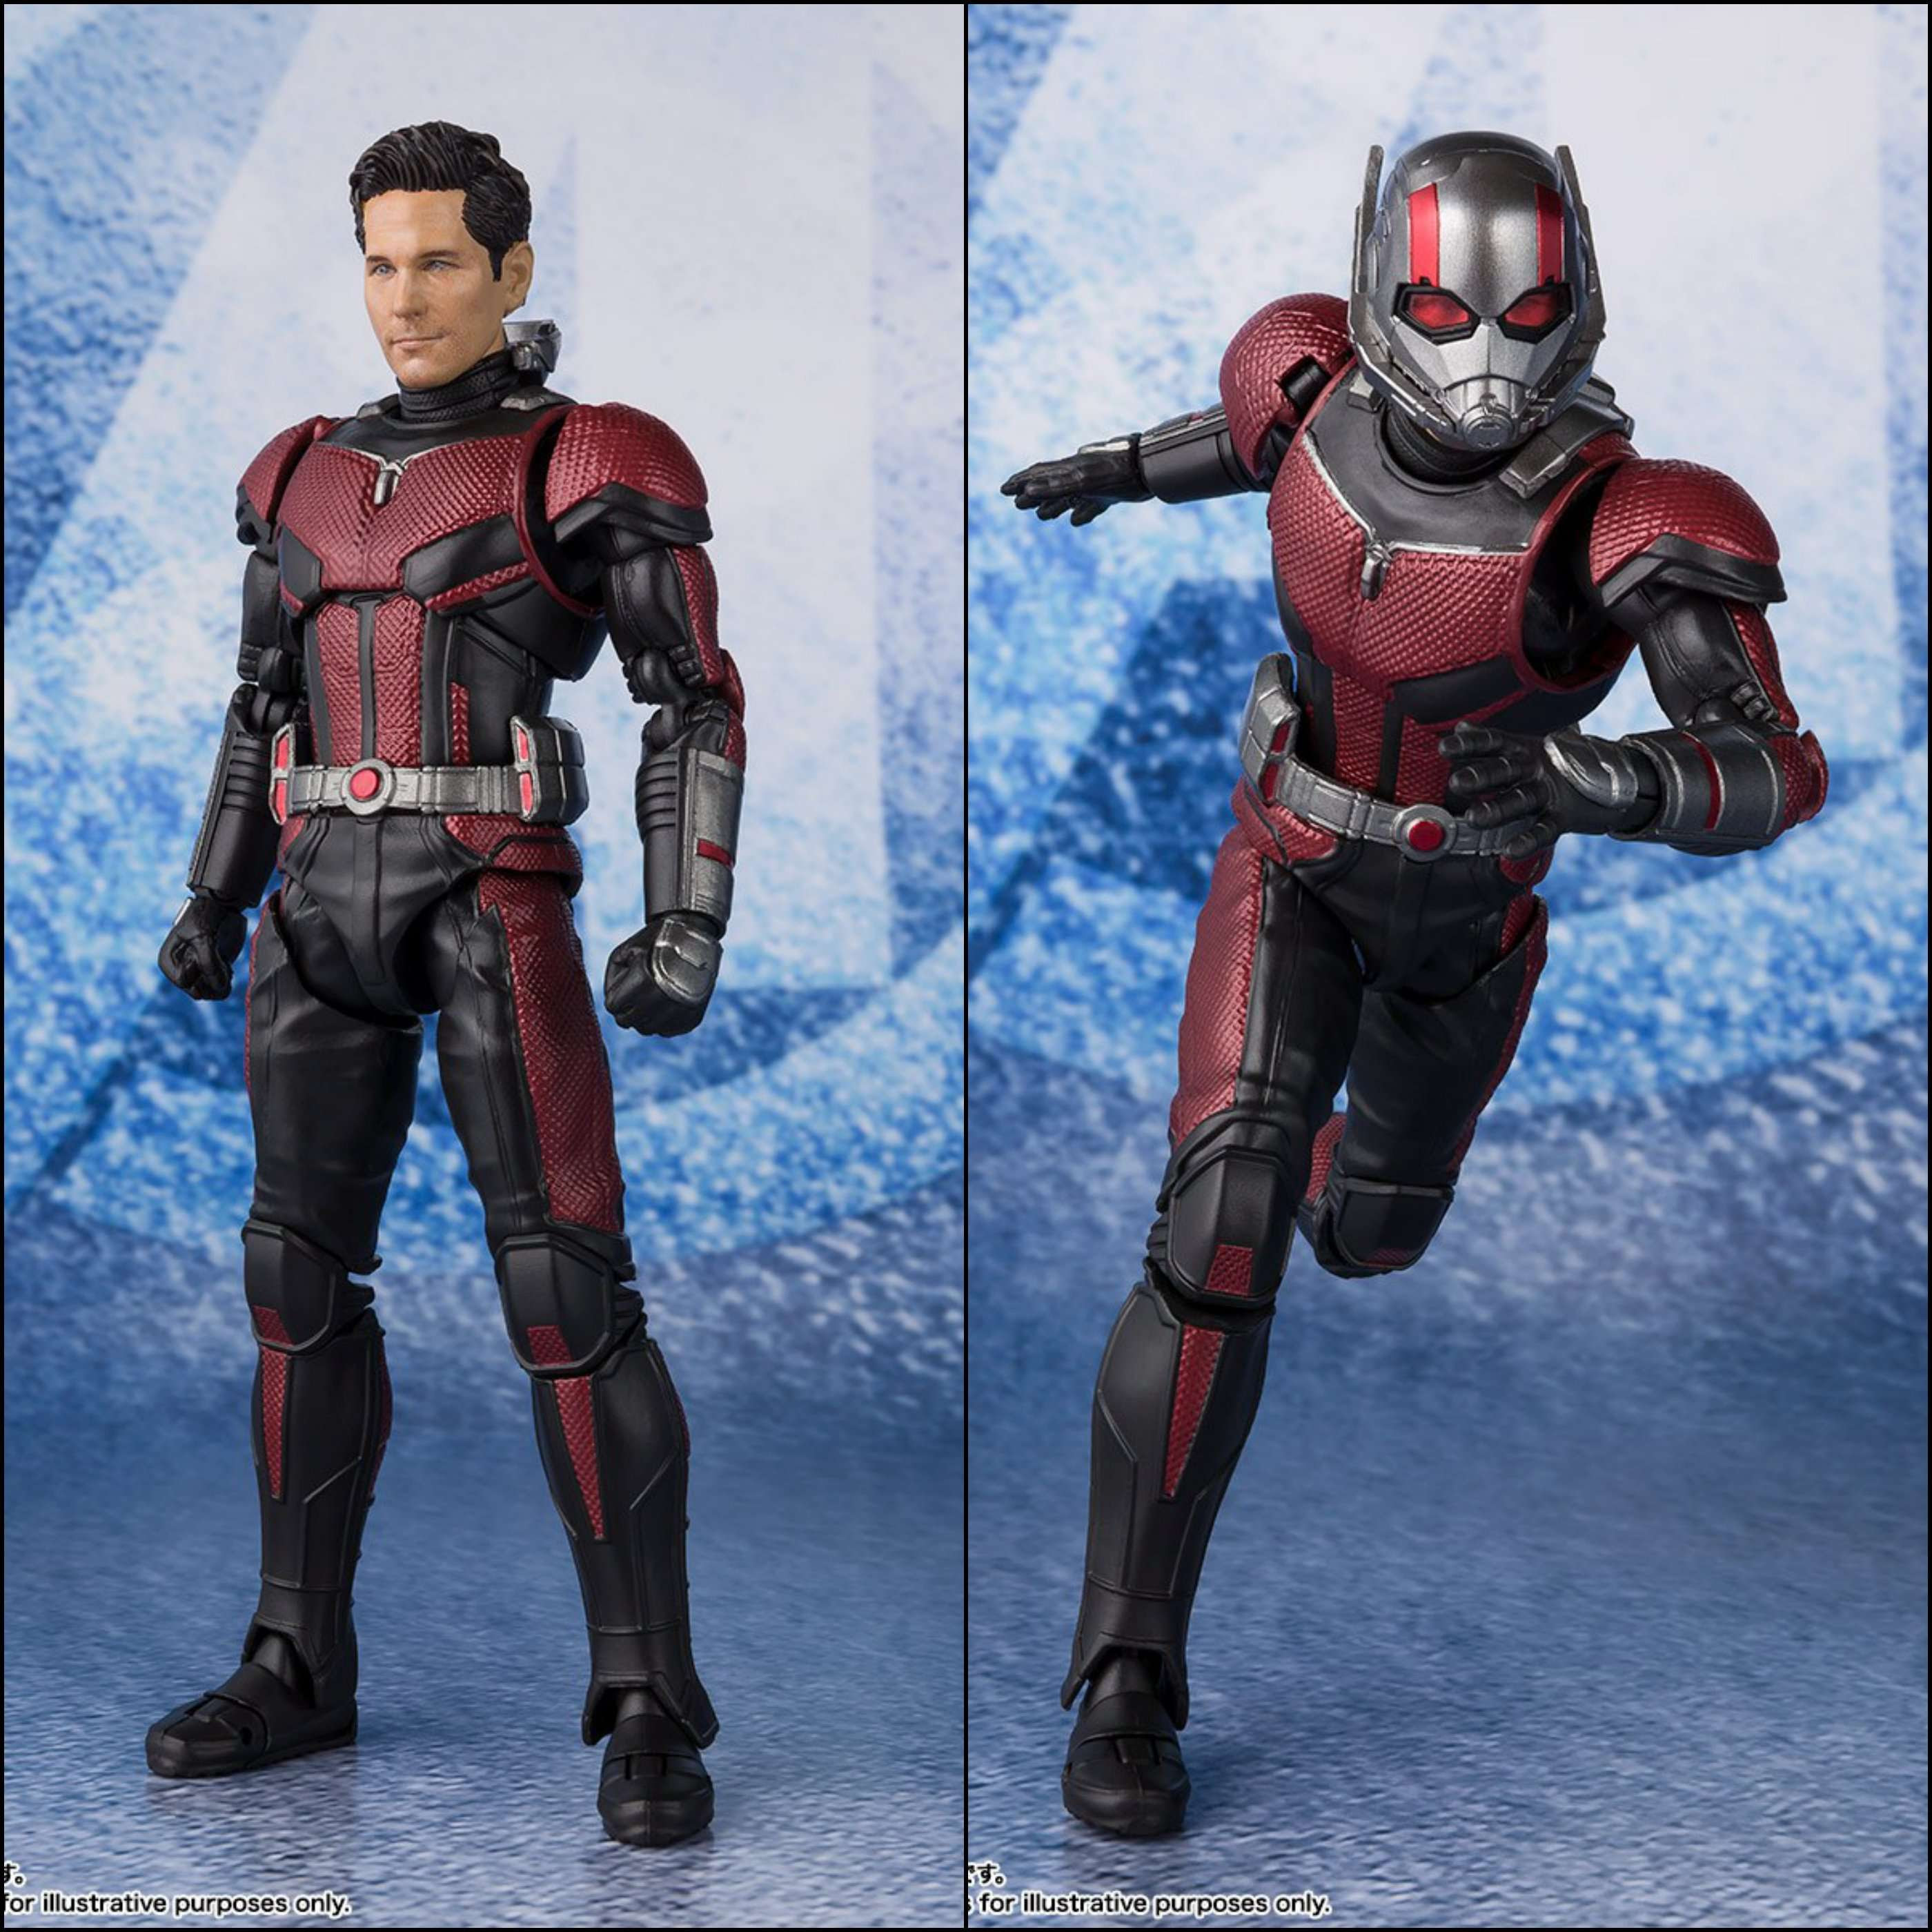 Image of Avengers: Endgame S.H.Figuarts Ant-Man (Japanese Release)